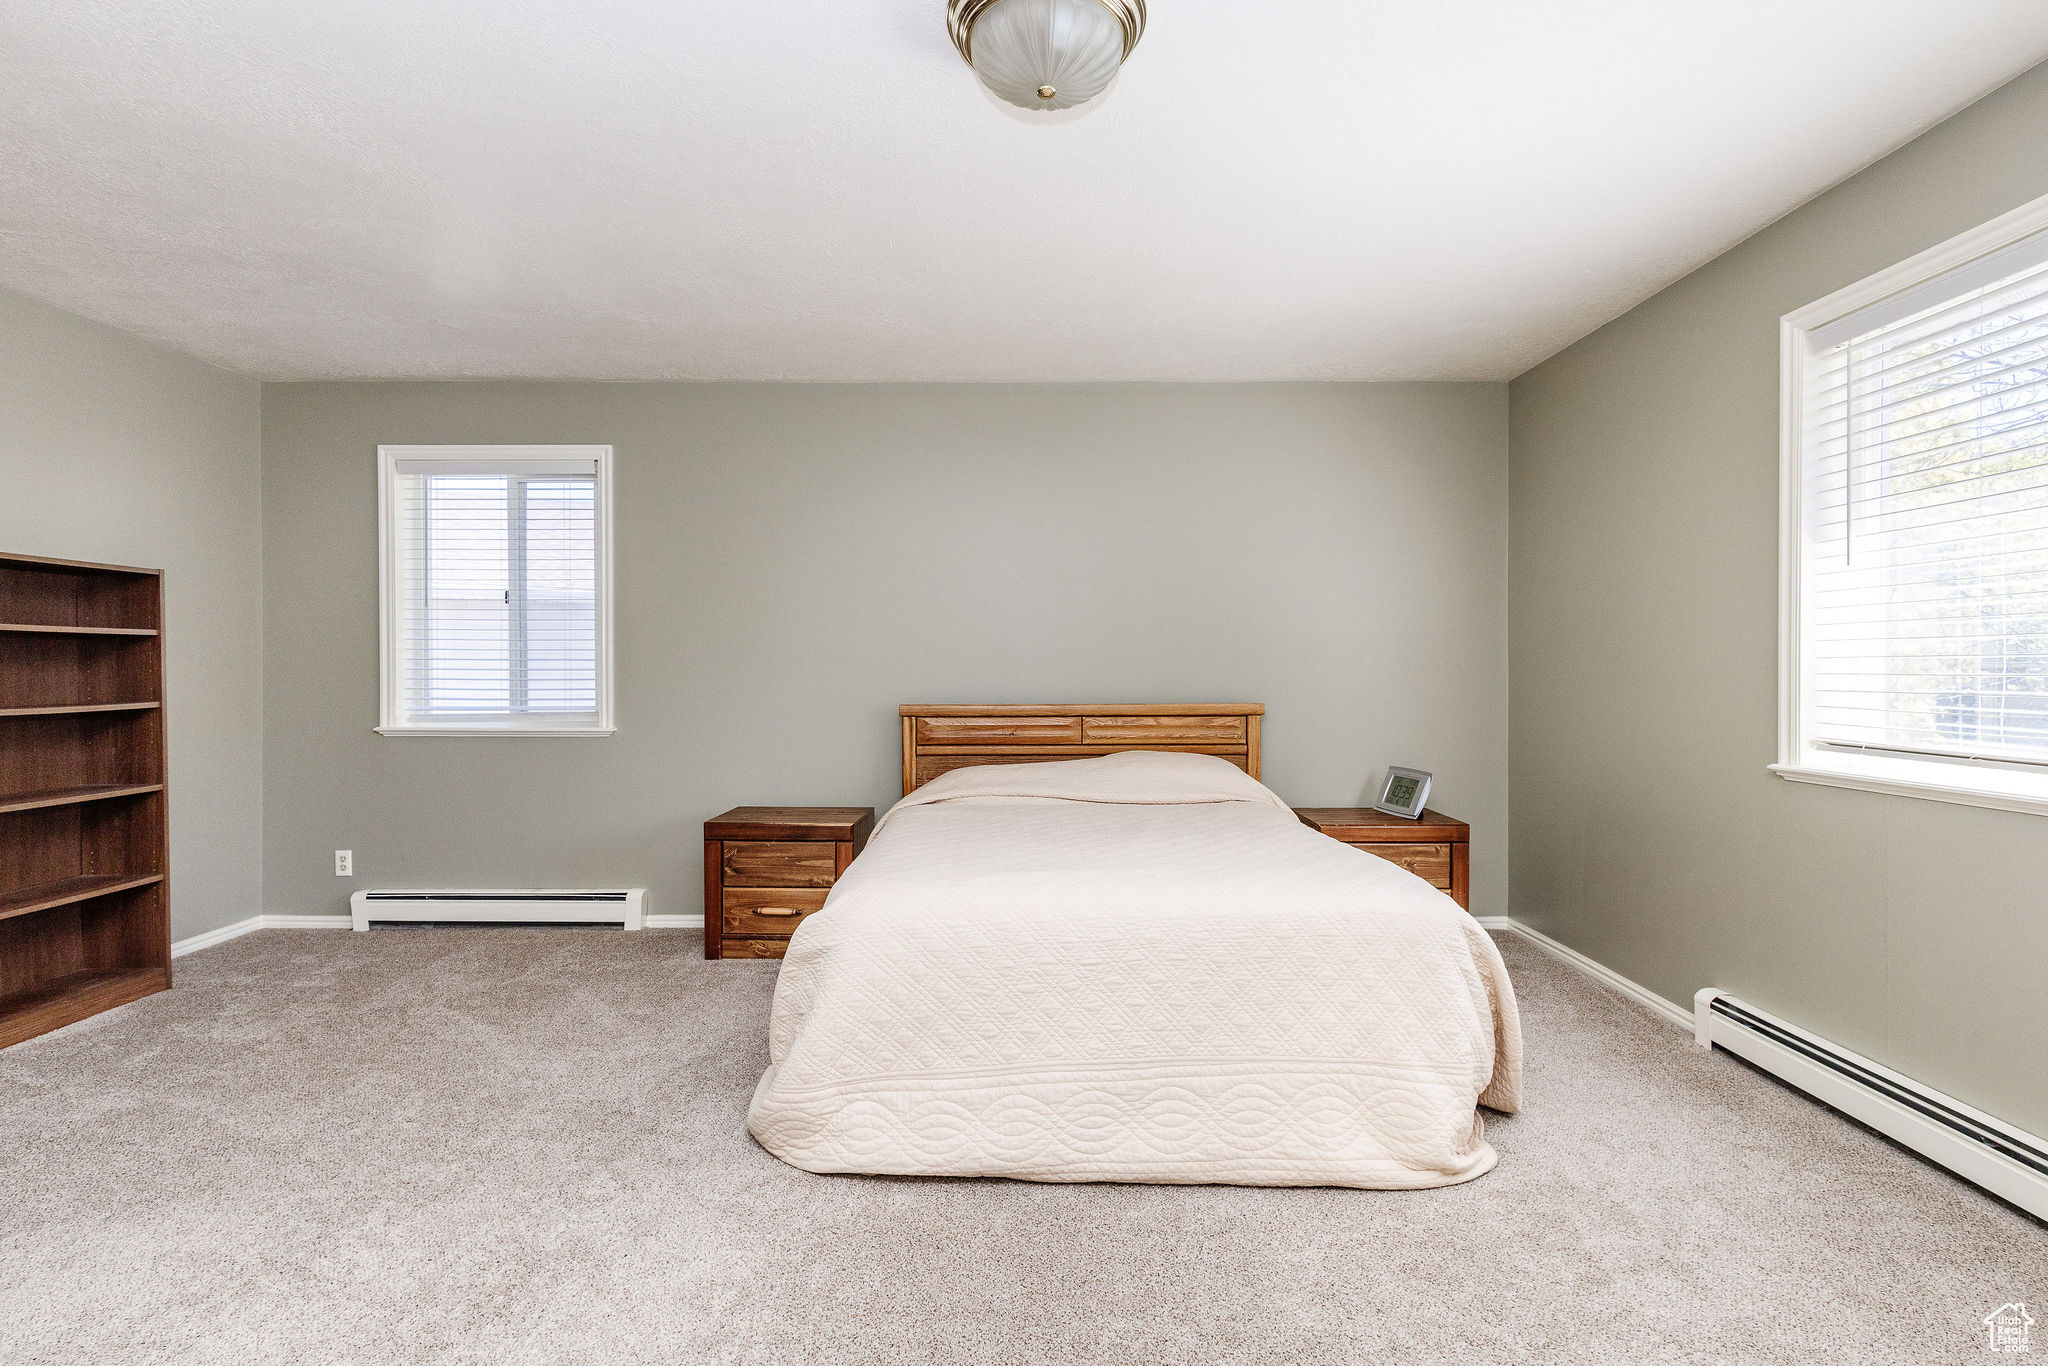 Carpeted bedroom with baseboard heating and multiple windows